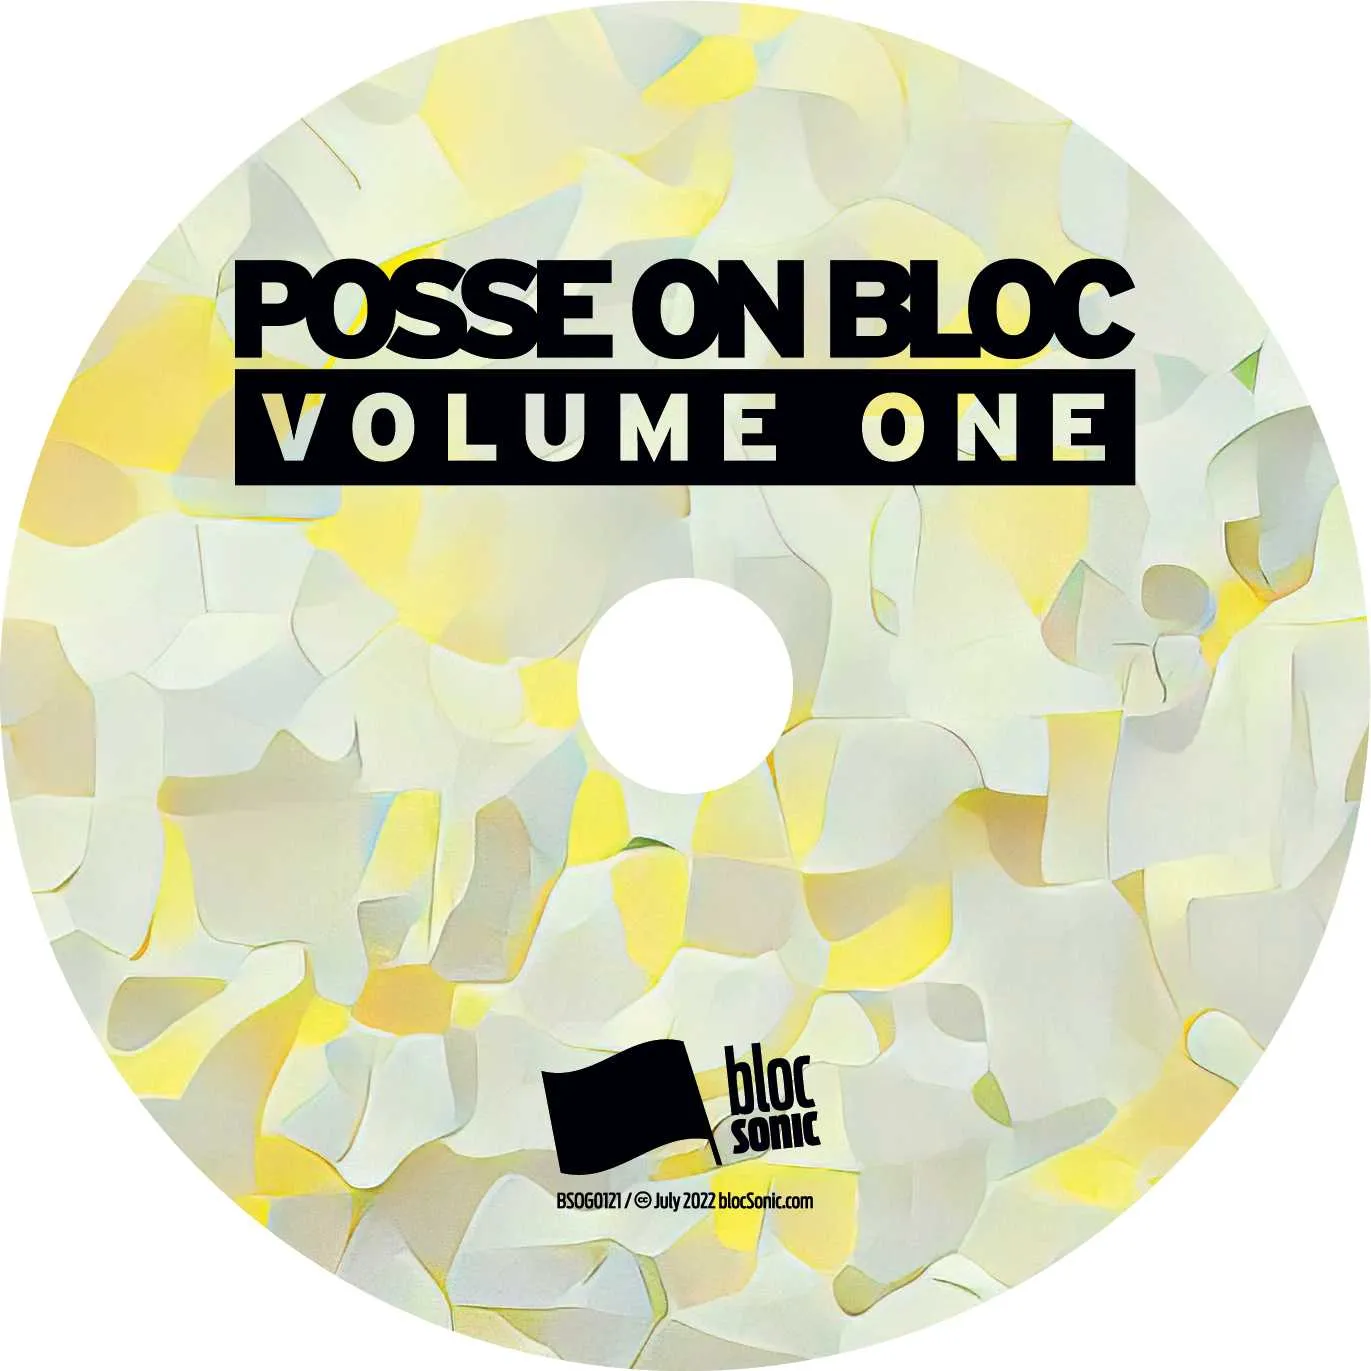 Album disc for “Posse On Bloc, Volume One (blocSonic Posse Cuts, So Far)” by Various Artists